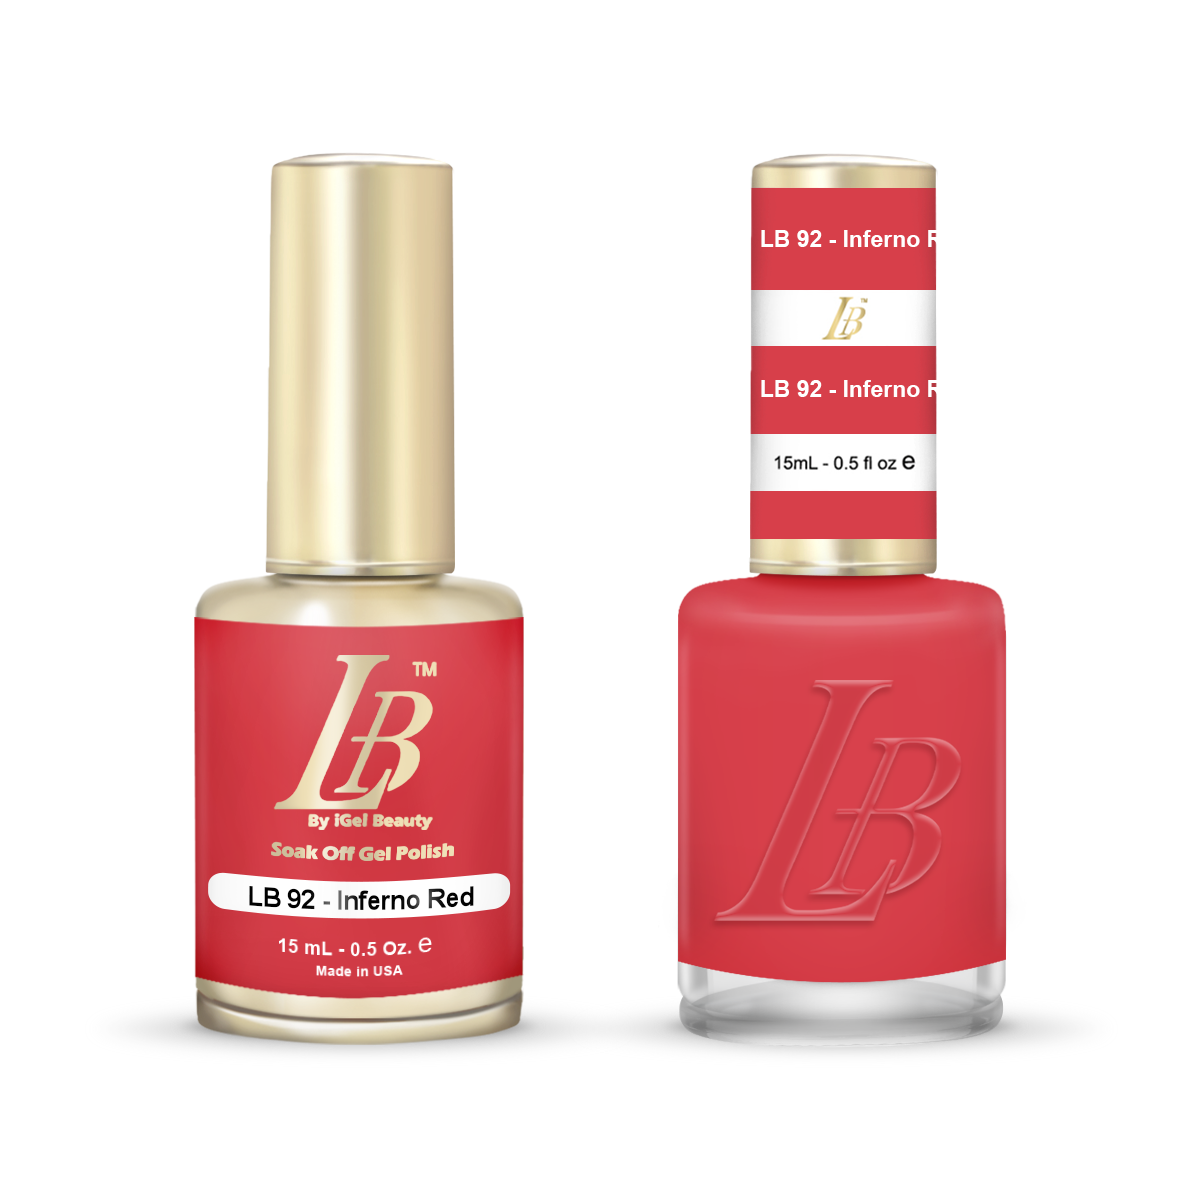 LB Duo - LB092 Inferno Red